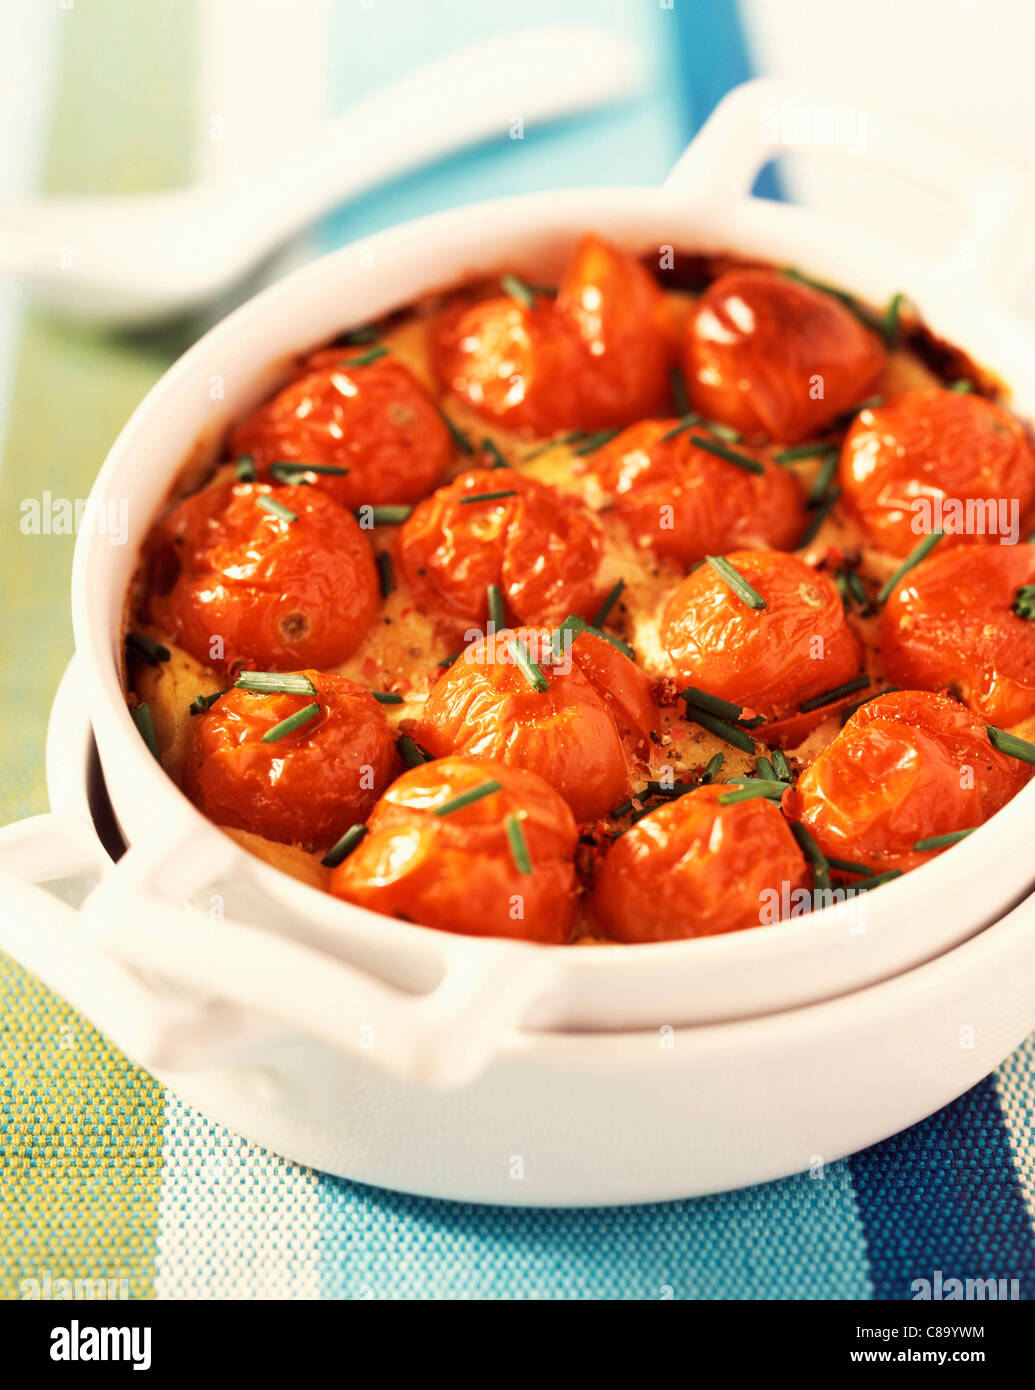 Cherry tomato and Tomme cheese batter pudding Stock Photo